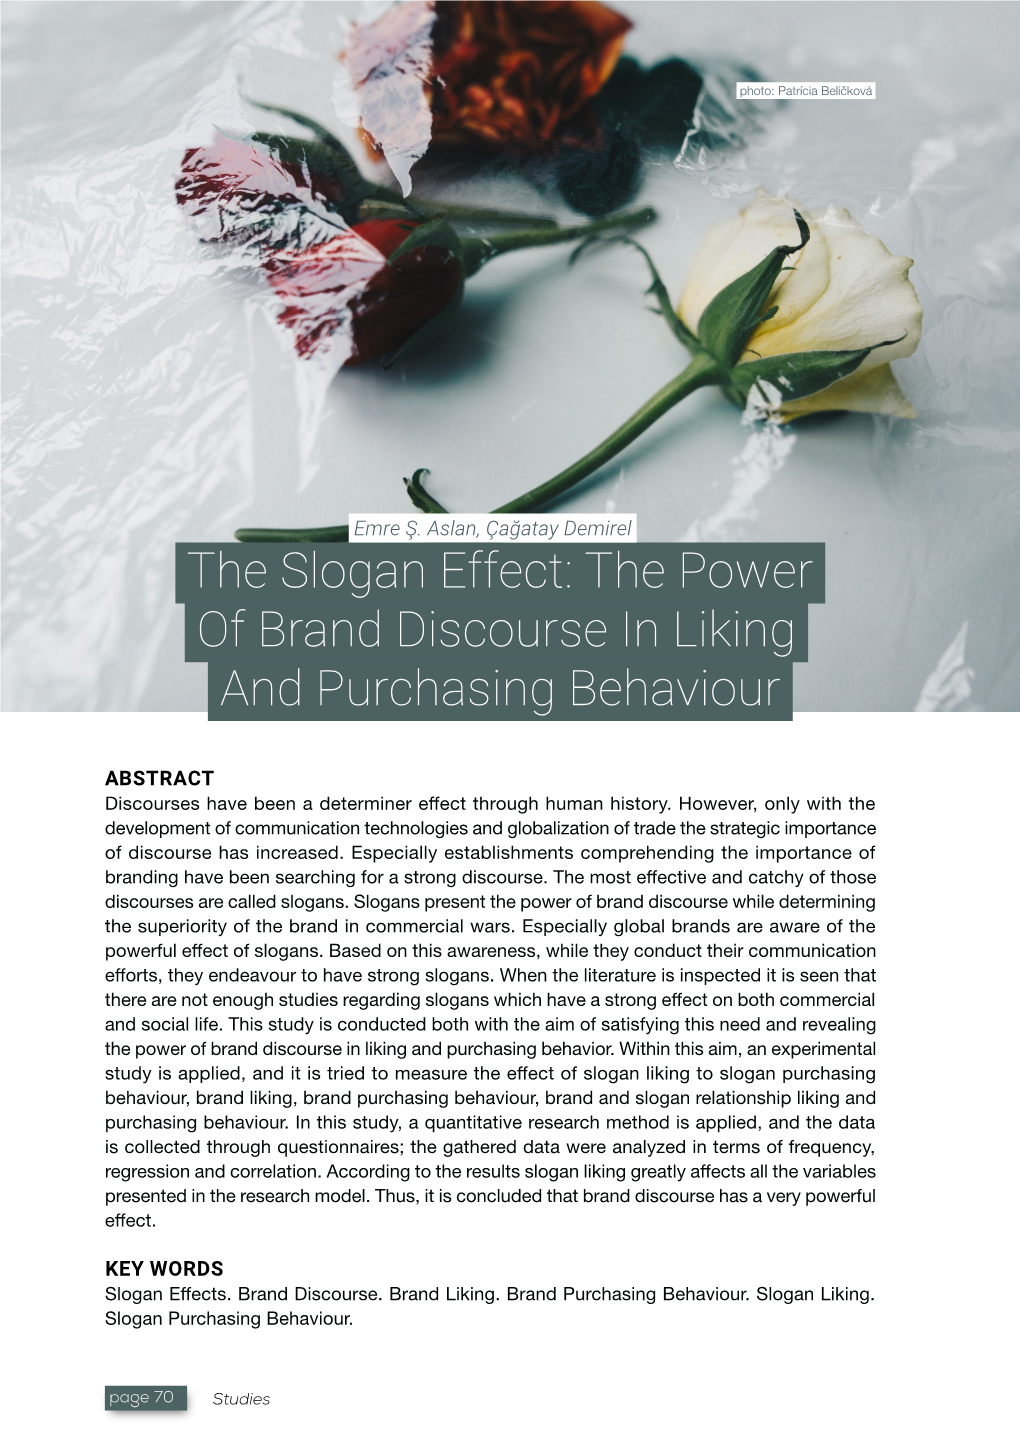 The Slogan Effect: the Power of Brand Discourse in Liking and Purchasing Behaviour